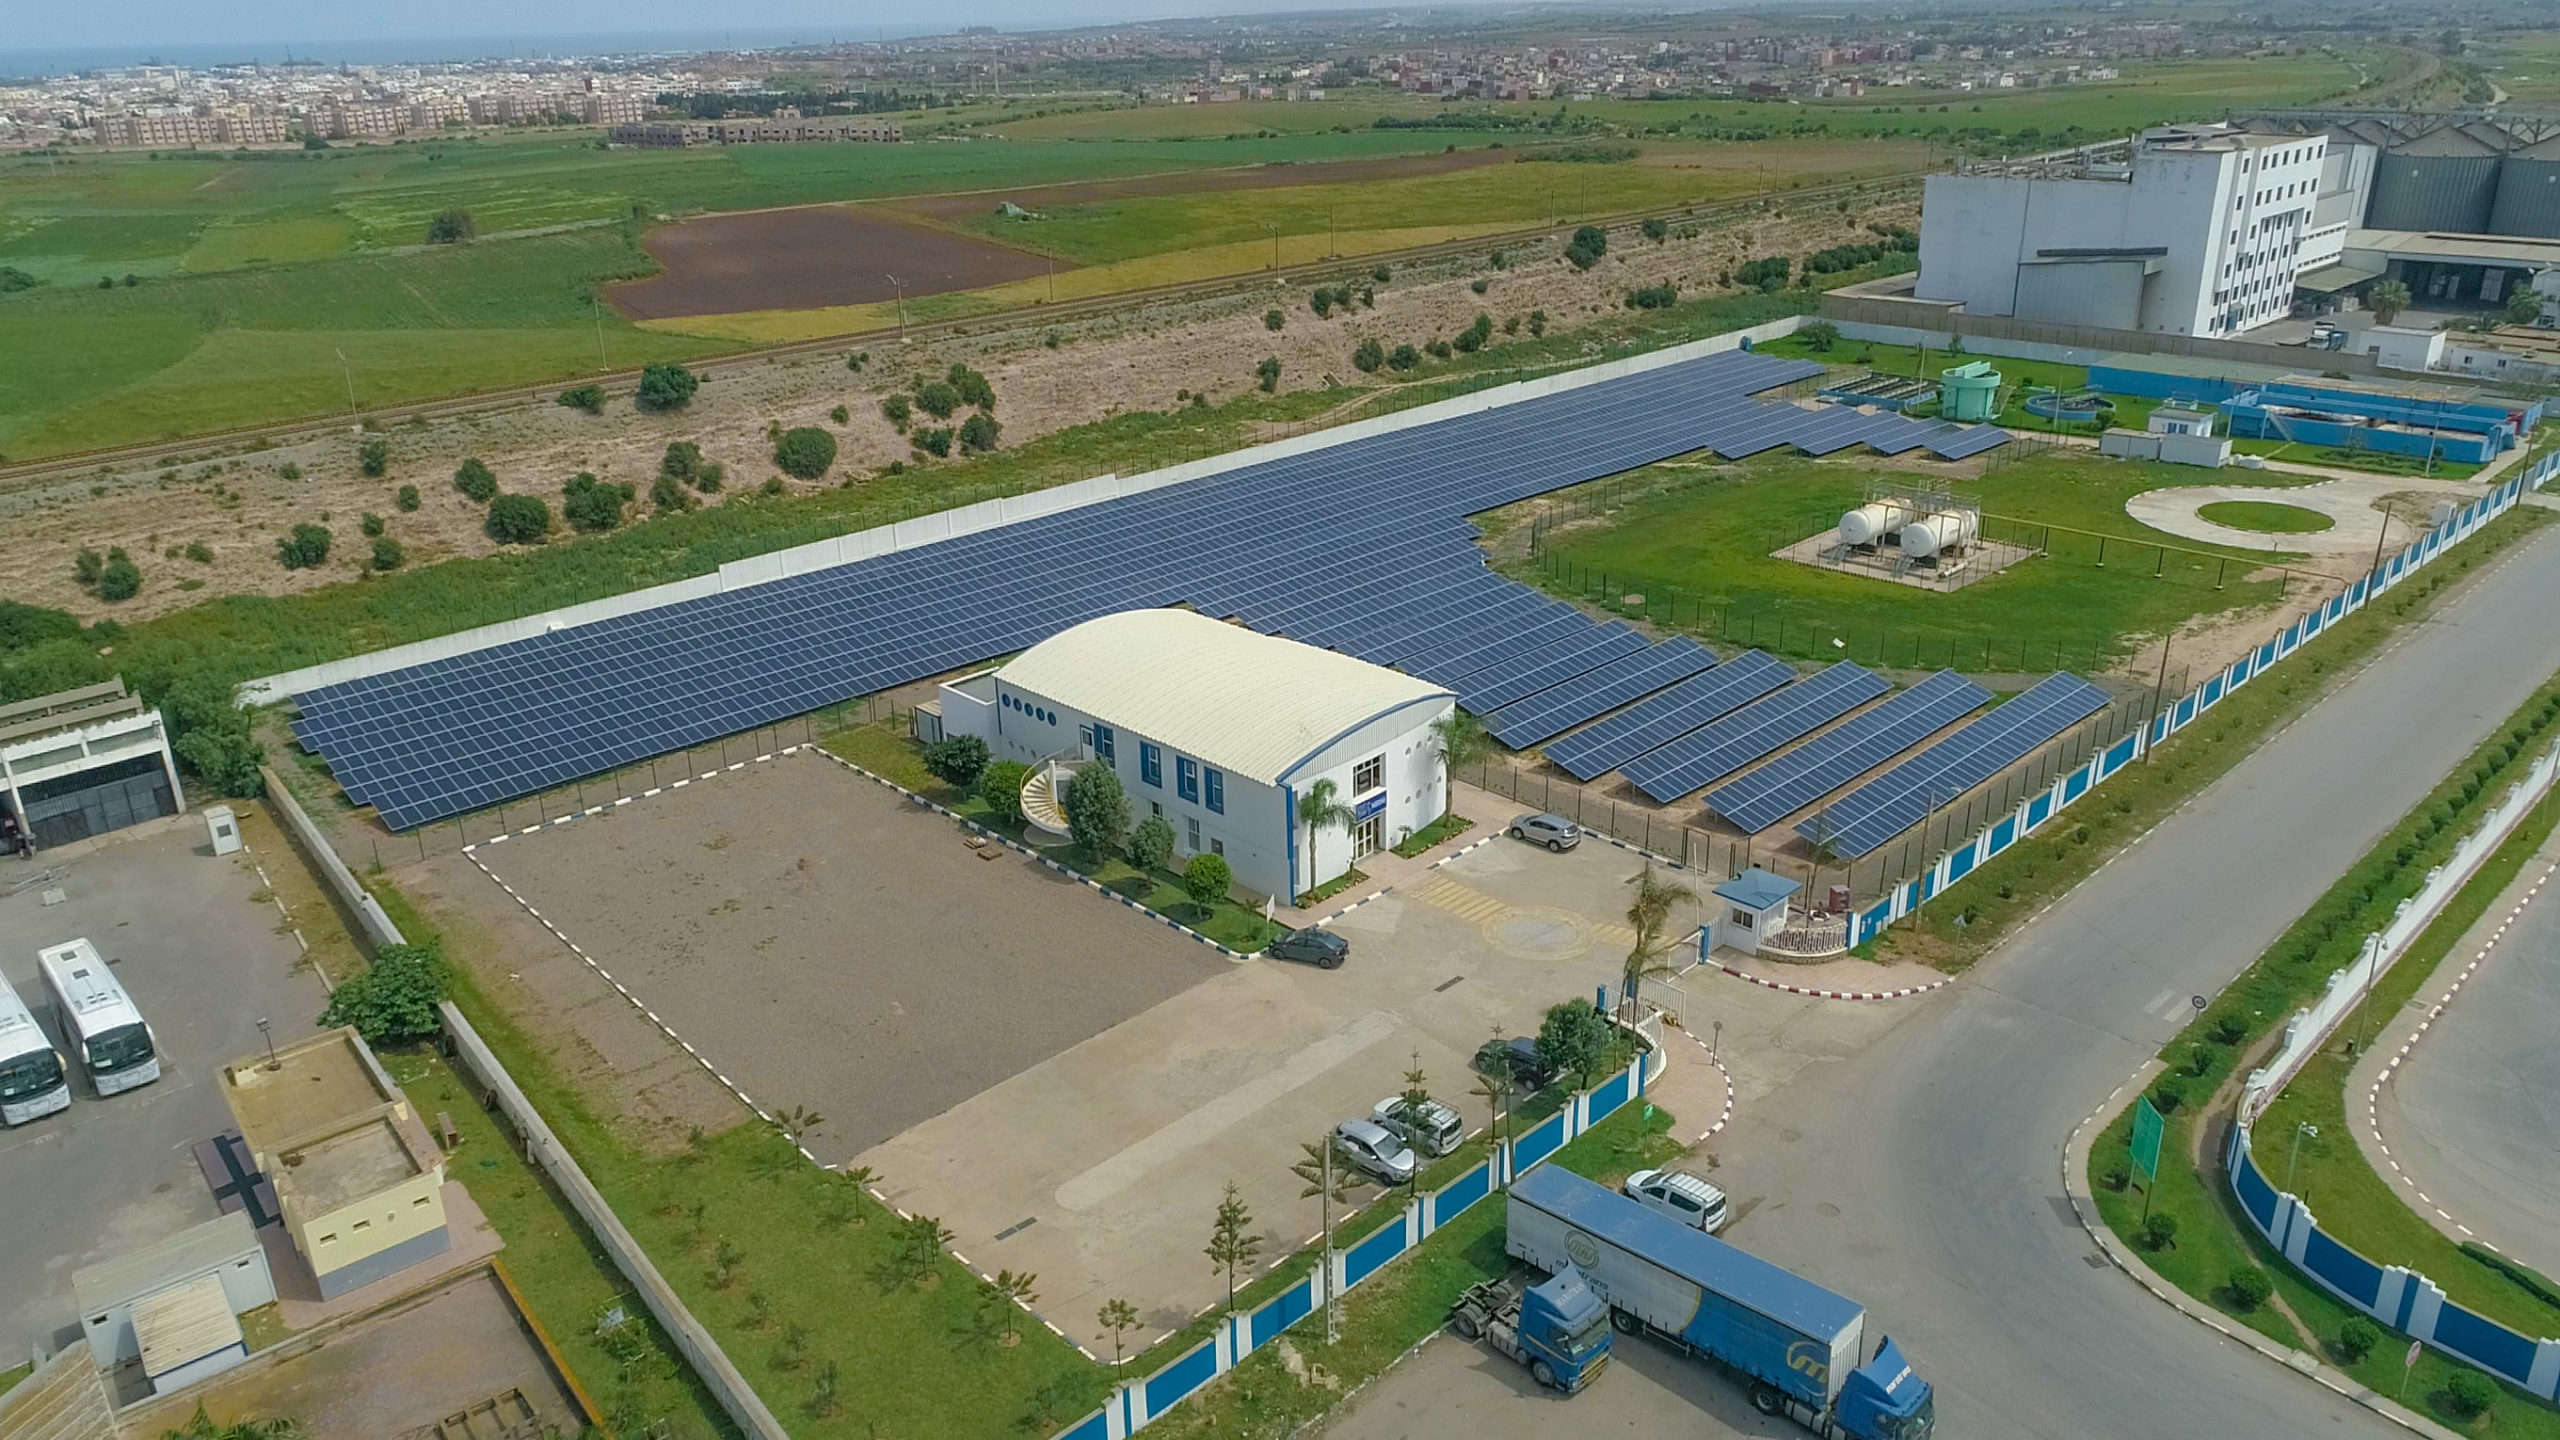 Picture of Qair's solar power plant on Nestlé facility in Morocco